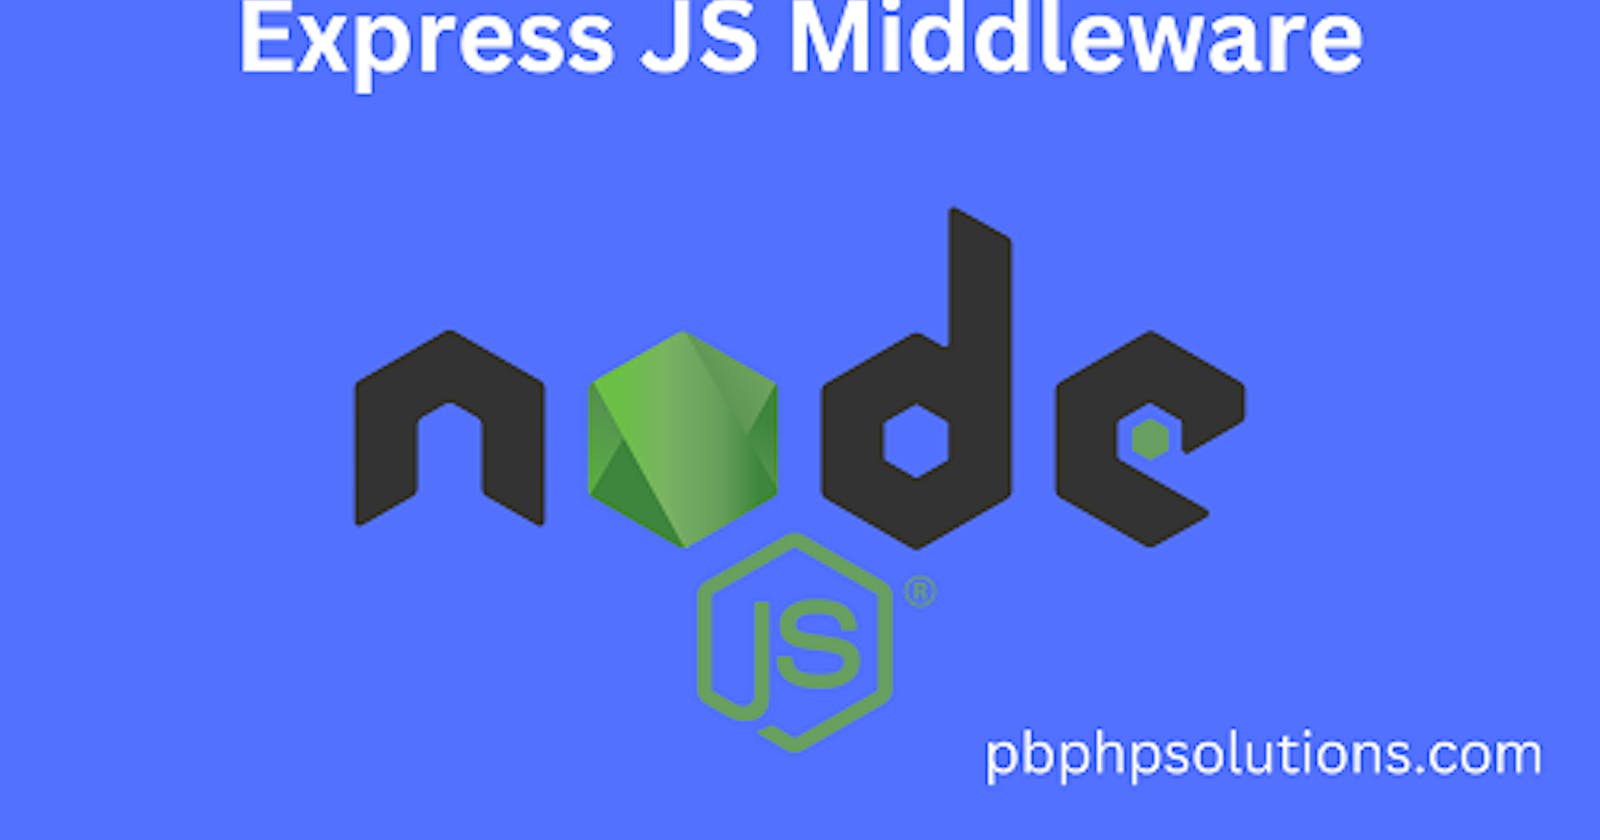 How to Use Express JS Middleware for All Routes